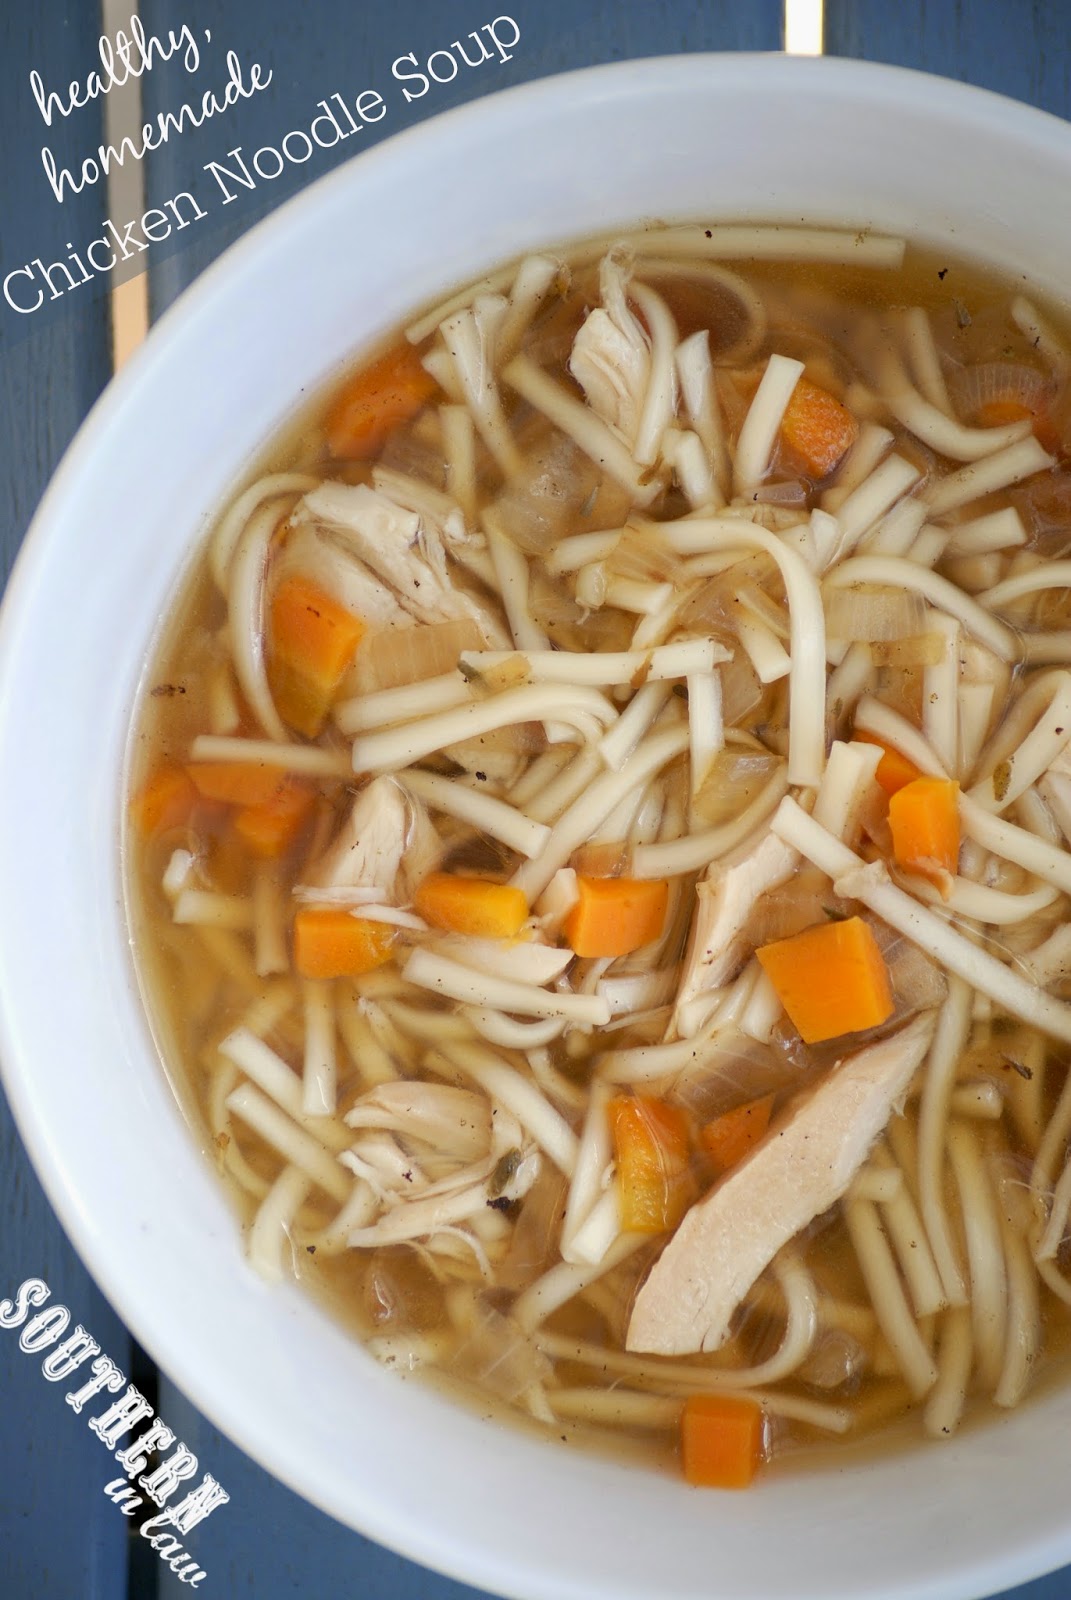 Homemade Healthy Chicken Noodle Soup Recipe - gluten free, additive free, sugar free, clean eating friendly, healthy, low fat